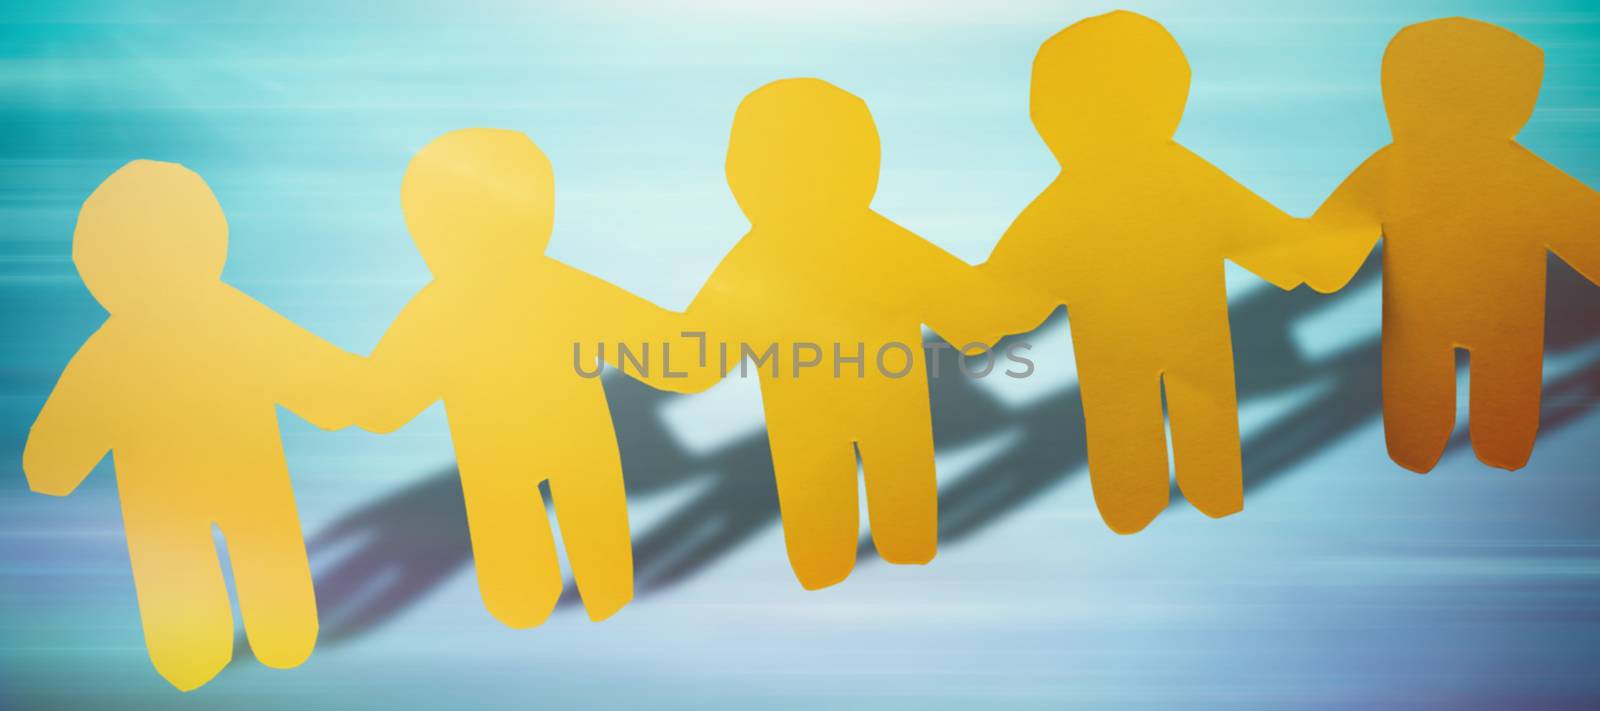 Composite image of yellow hand holding paper by Wavebreakmedia